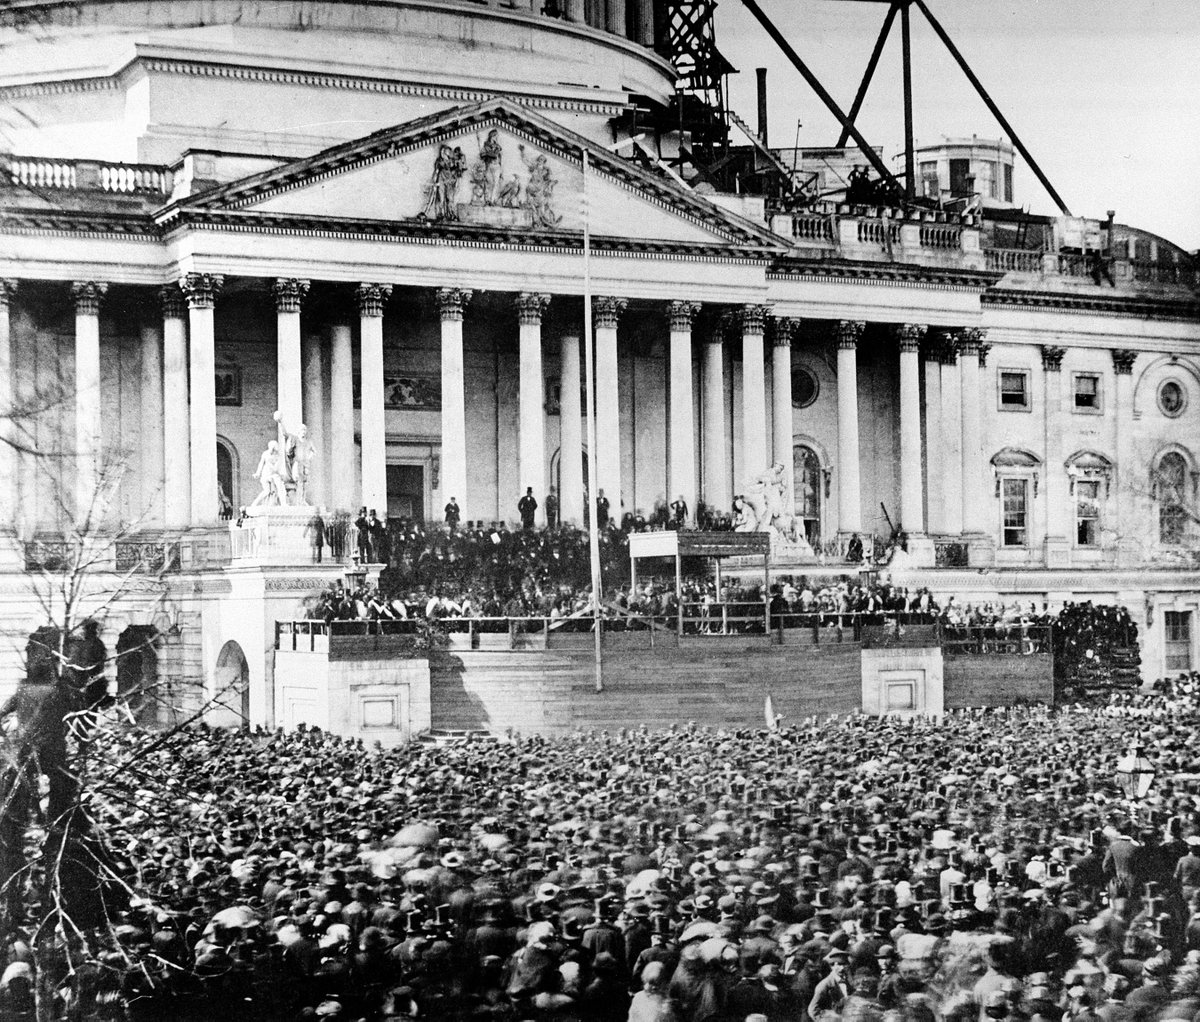 Wondering what the scaffolding is behind Abraham Lincoln’s 1861 swearing-in ceremony?It’s being used in construction of the Capitol dome, which was completed four years later in 1865. (AP Photo)